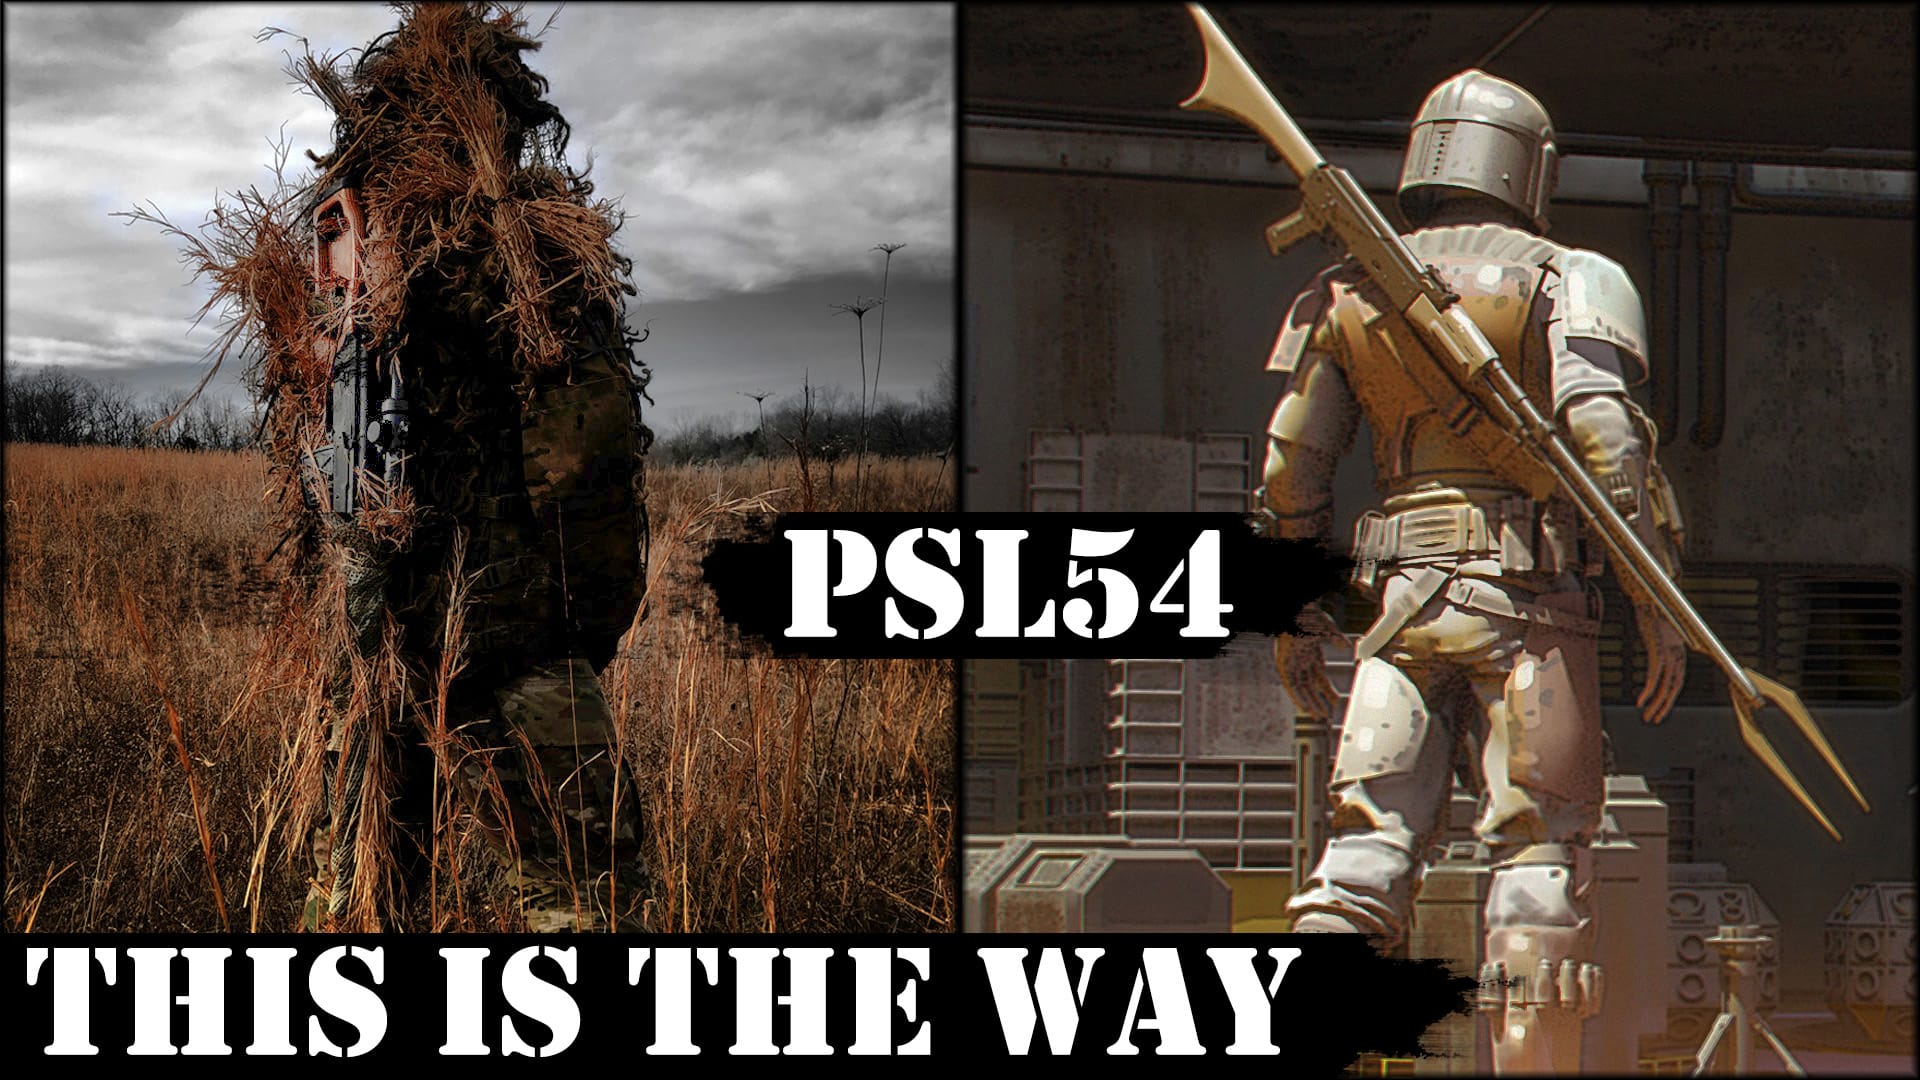 This is the Way! Poor Man’s Dragunov – PSL54!